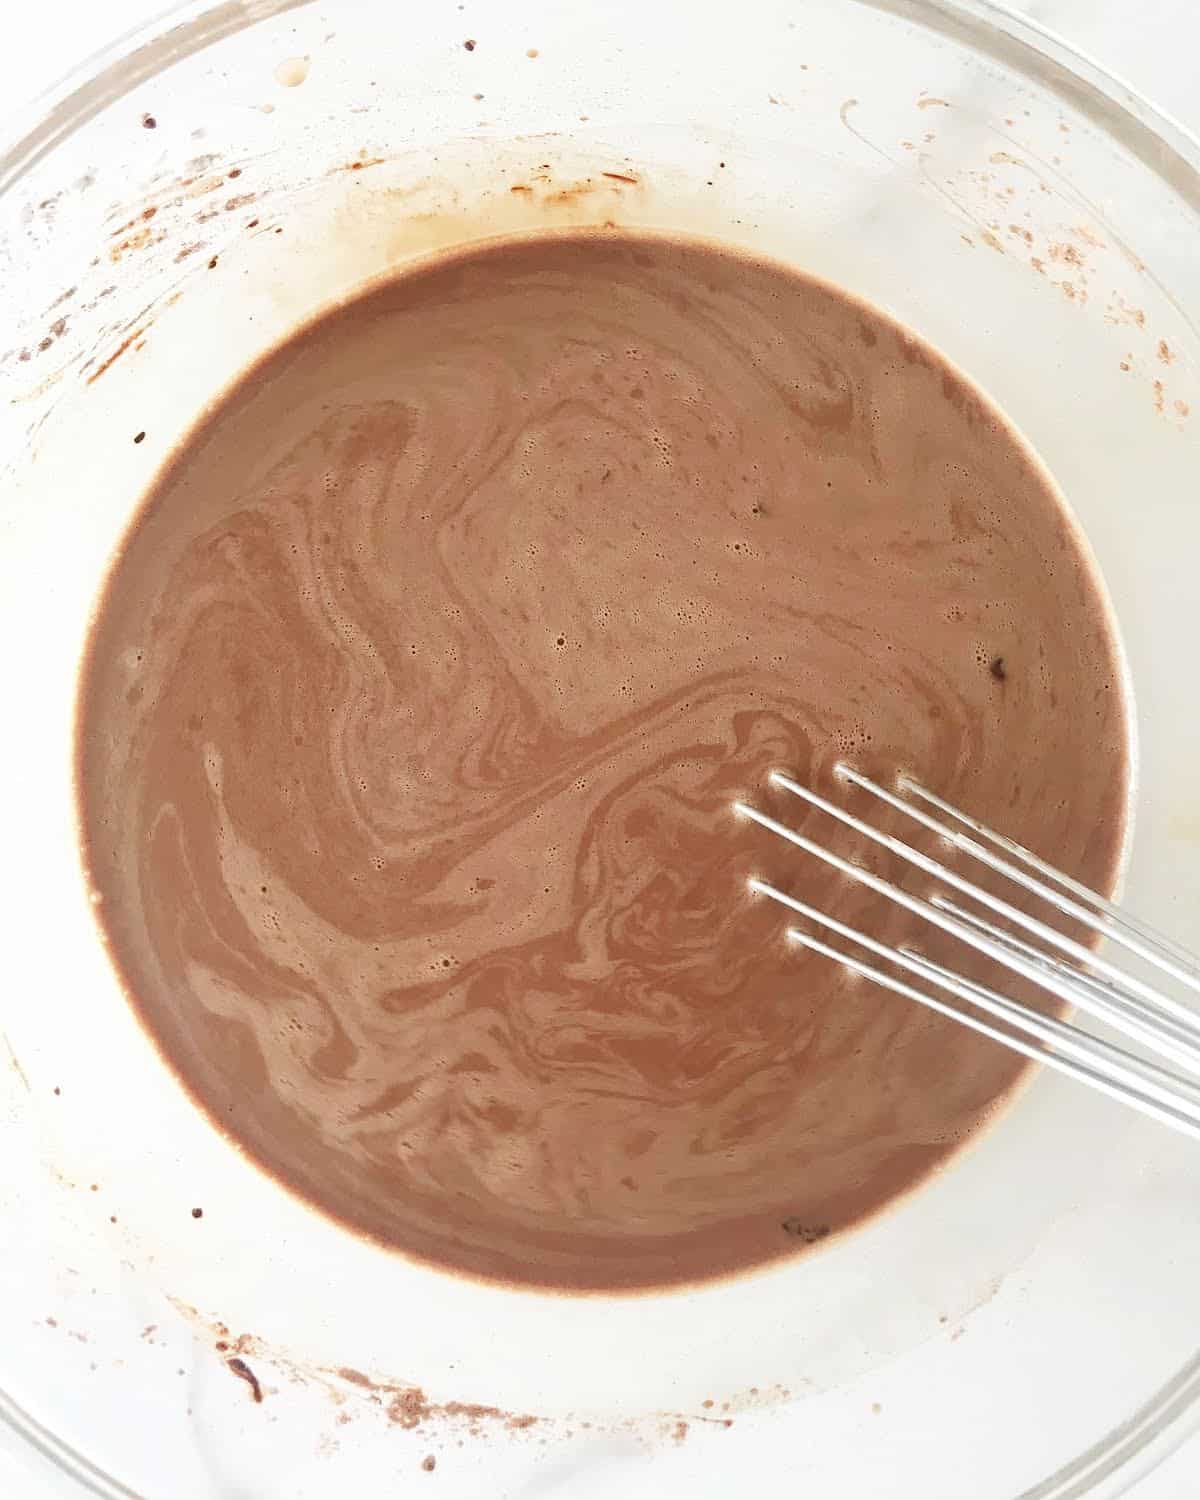 Chocolate milk in a glass bowl with a metal whisk inside.